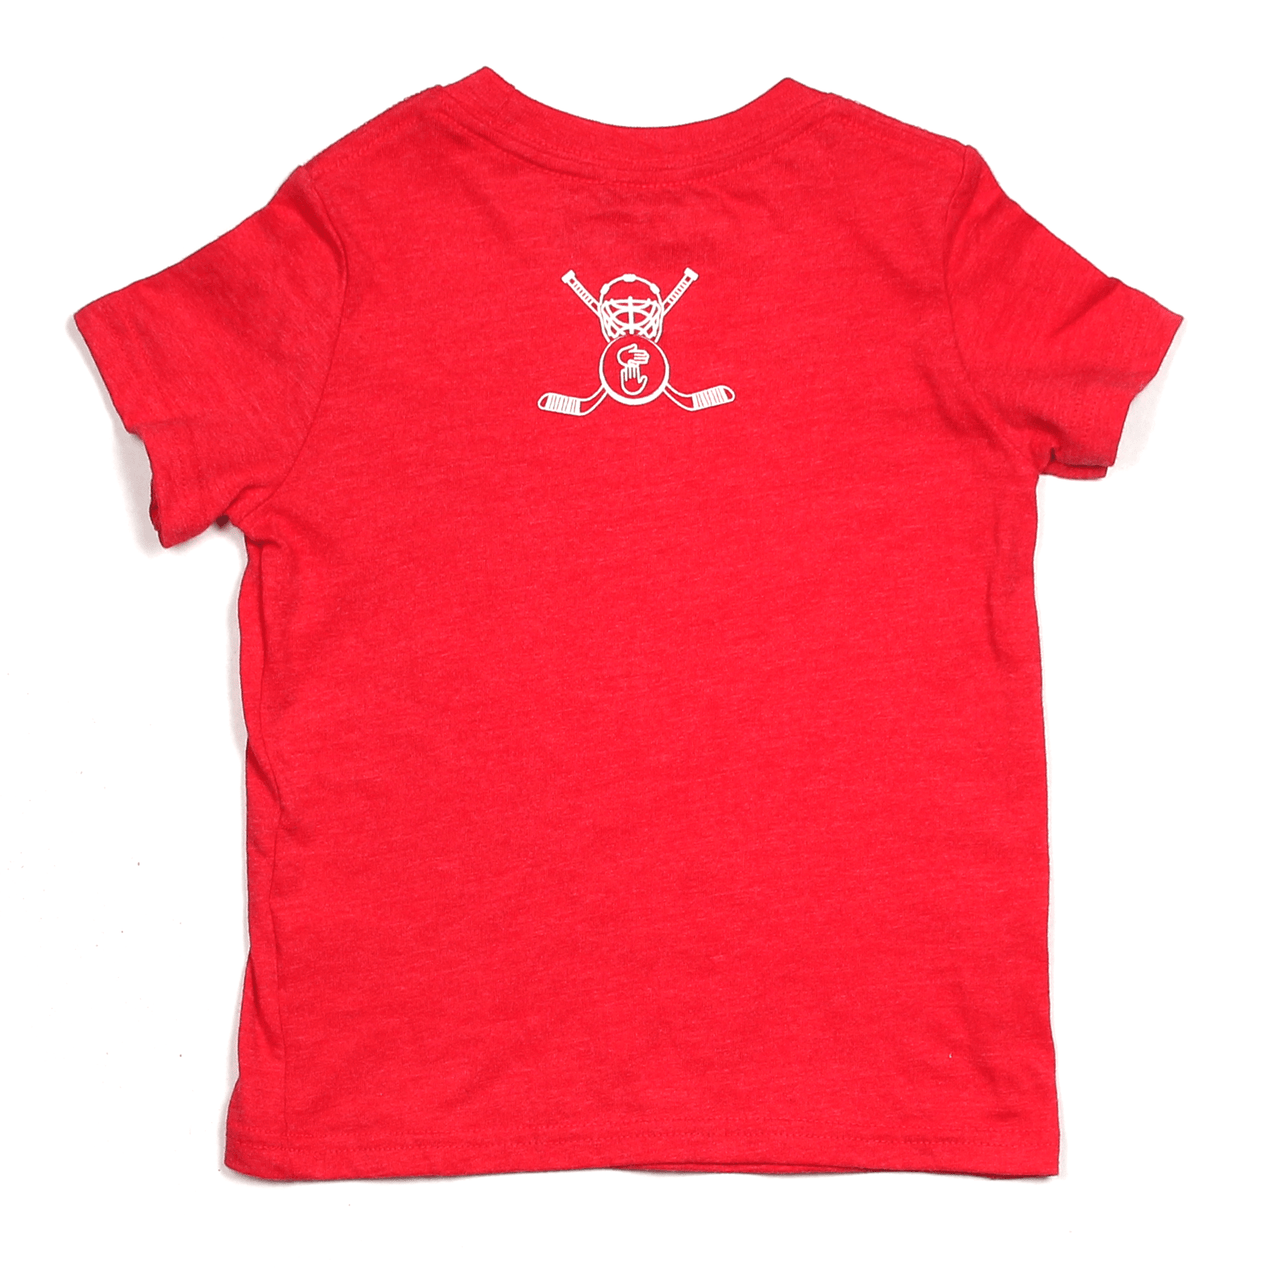 Hockey in the Glove Toddler Tee